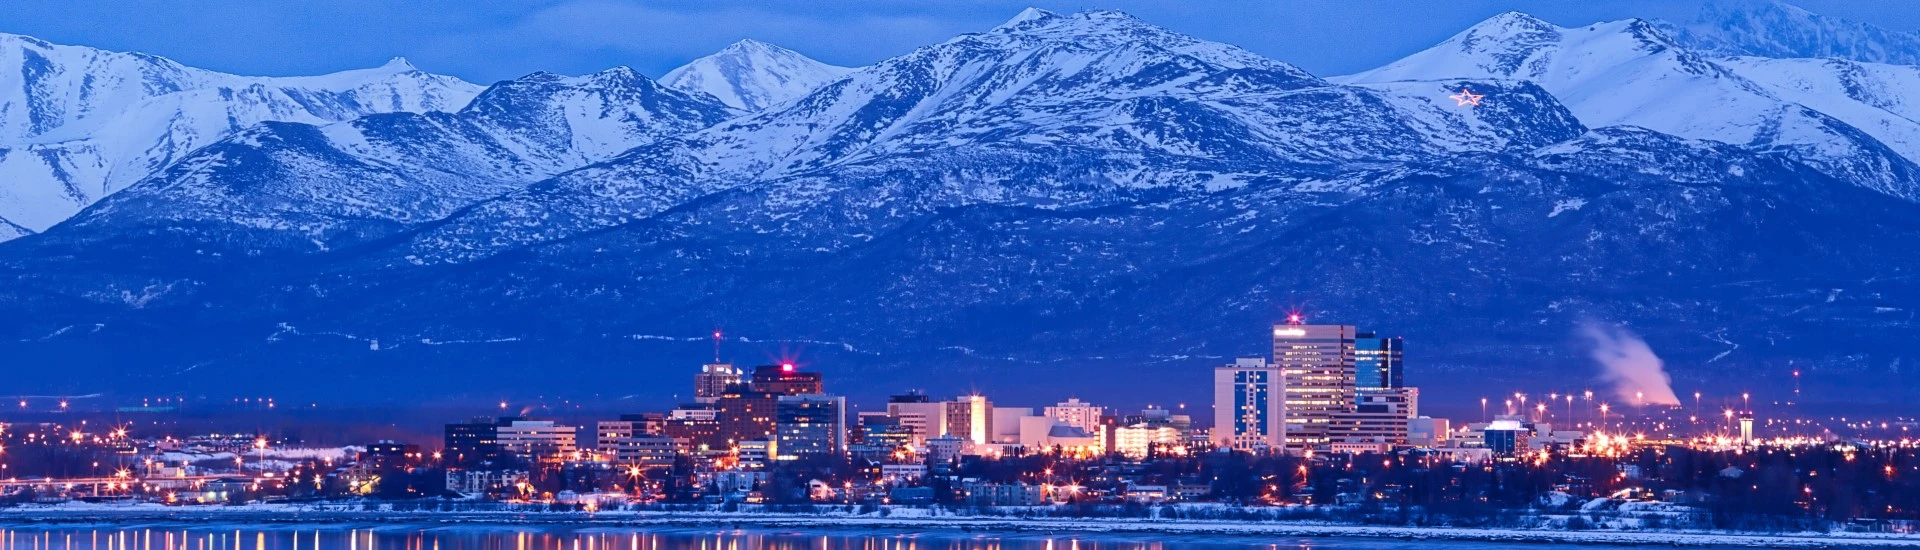 Snow-capped mountains and buildings at night in Anchorage, Alaska